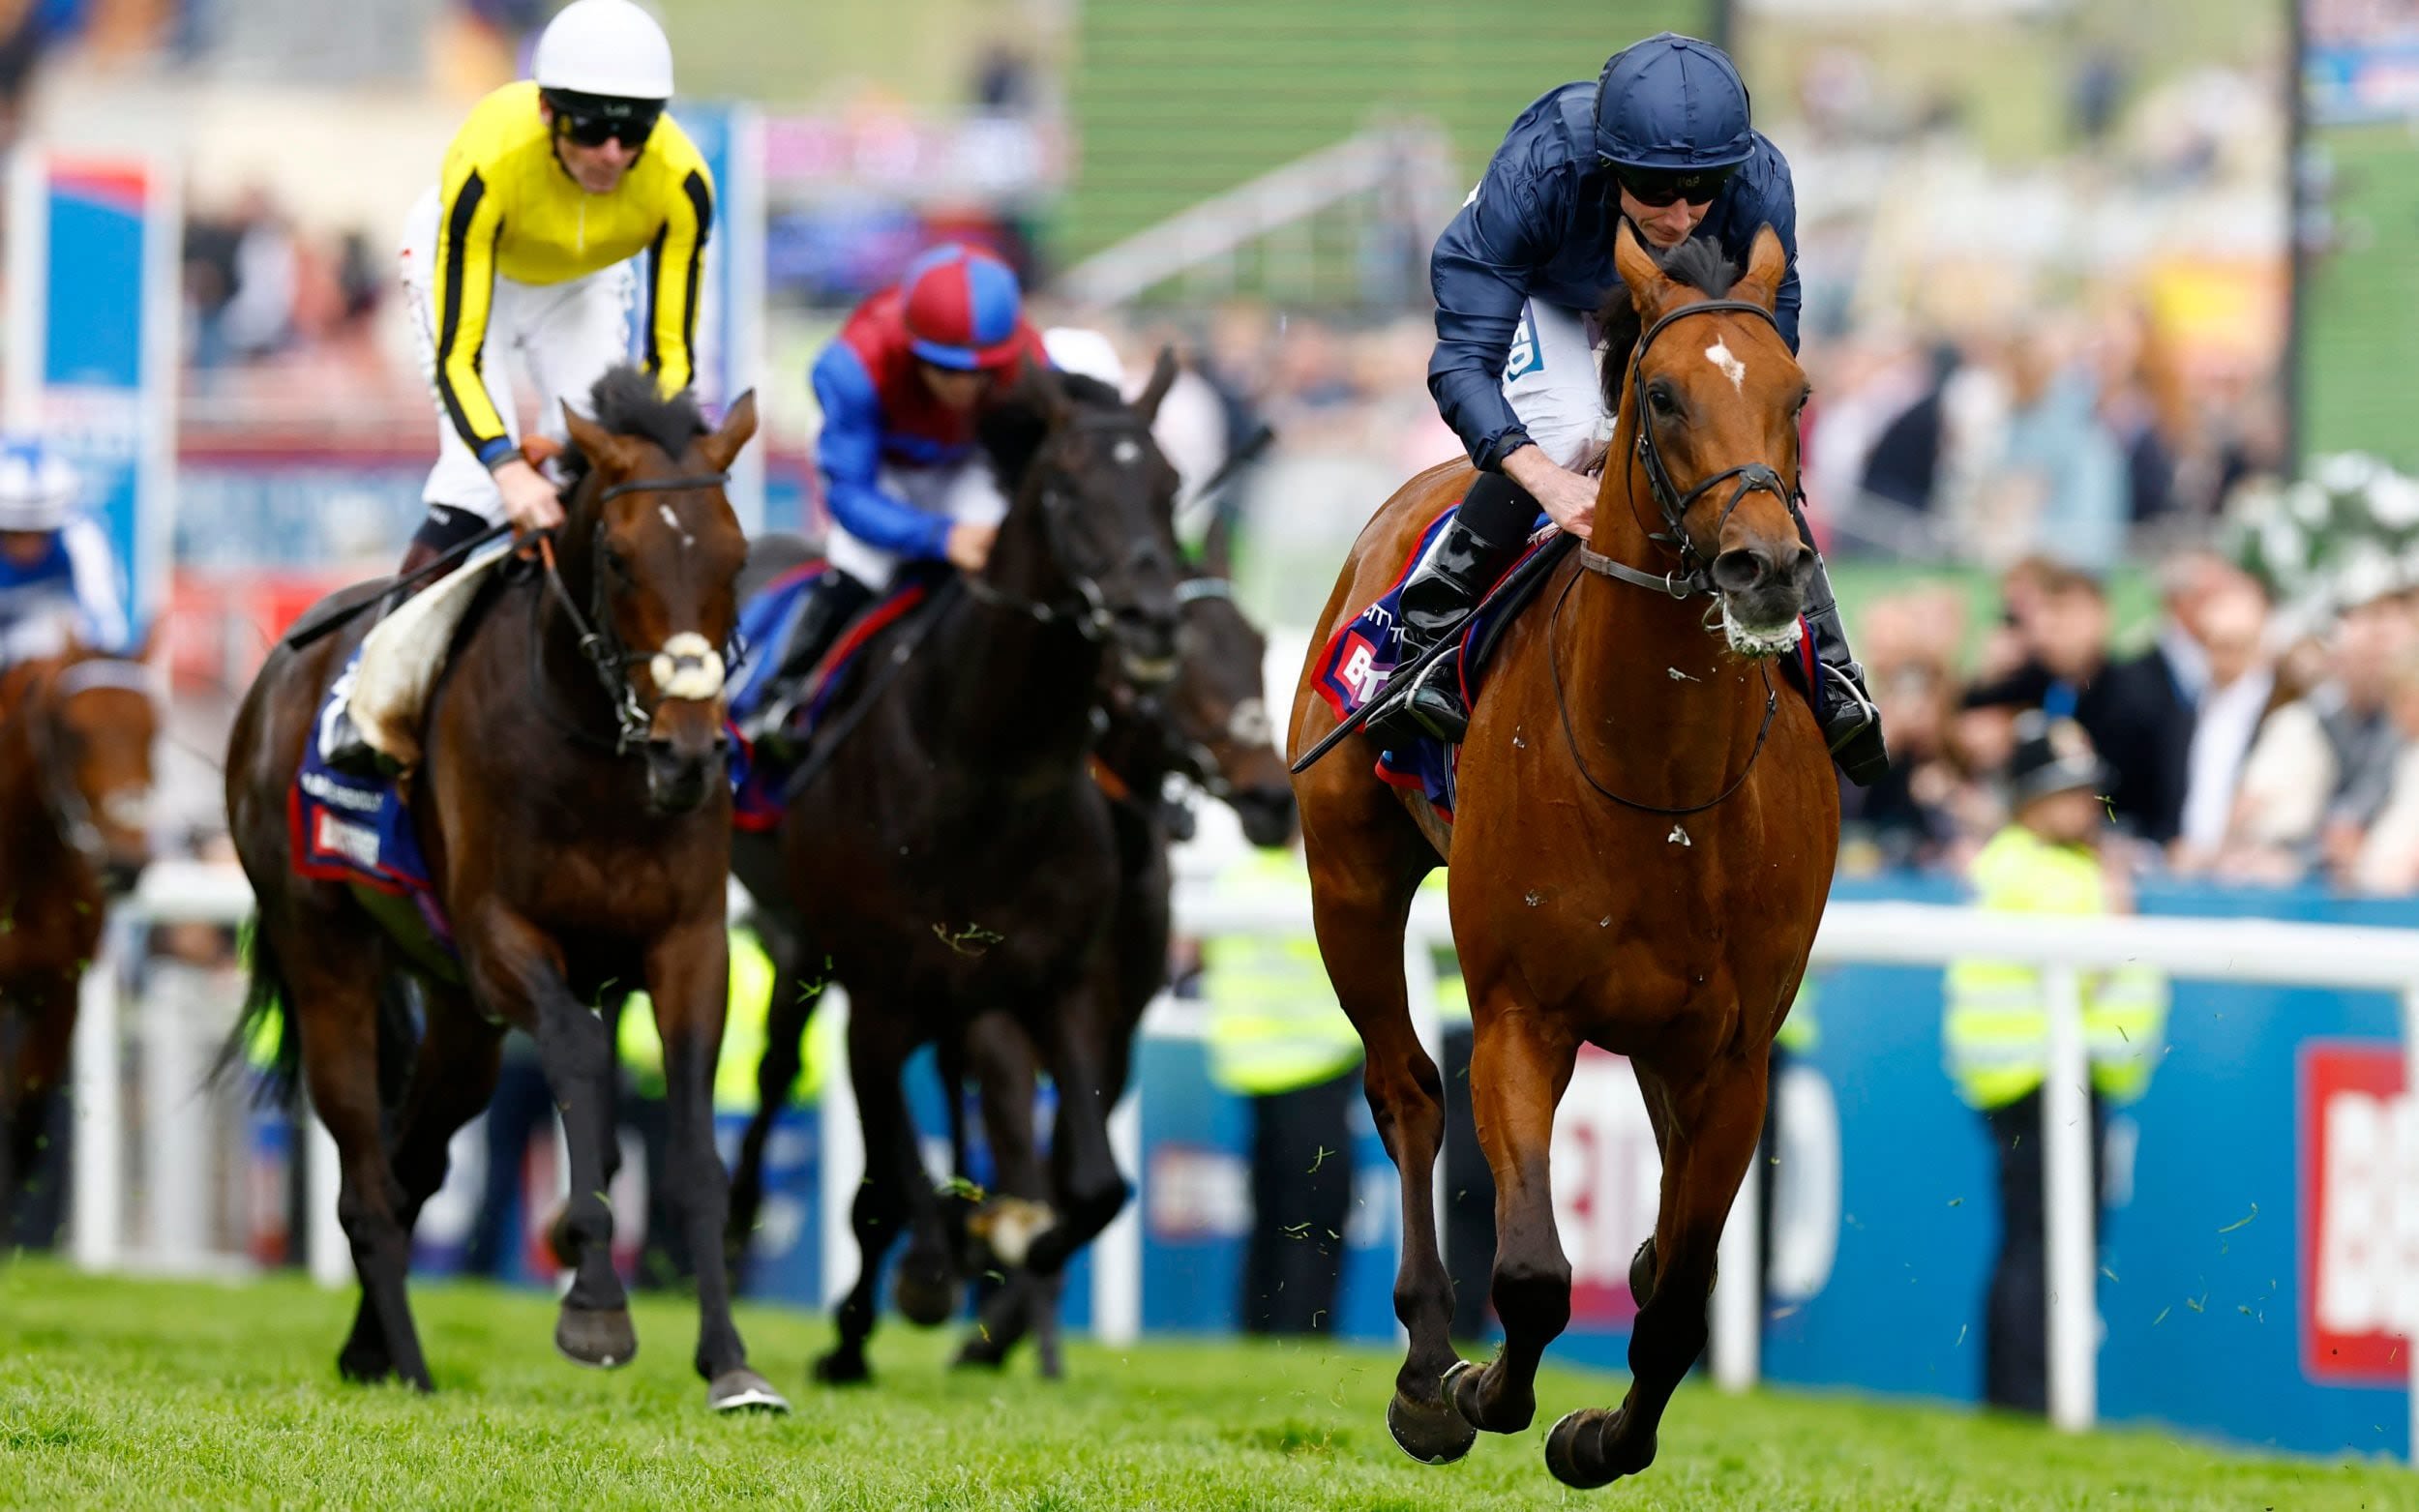 City Of Troy hailed greatest of Aidan O’Brien’s 10 Epsom Derby winners after storming victory